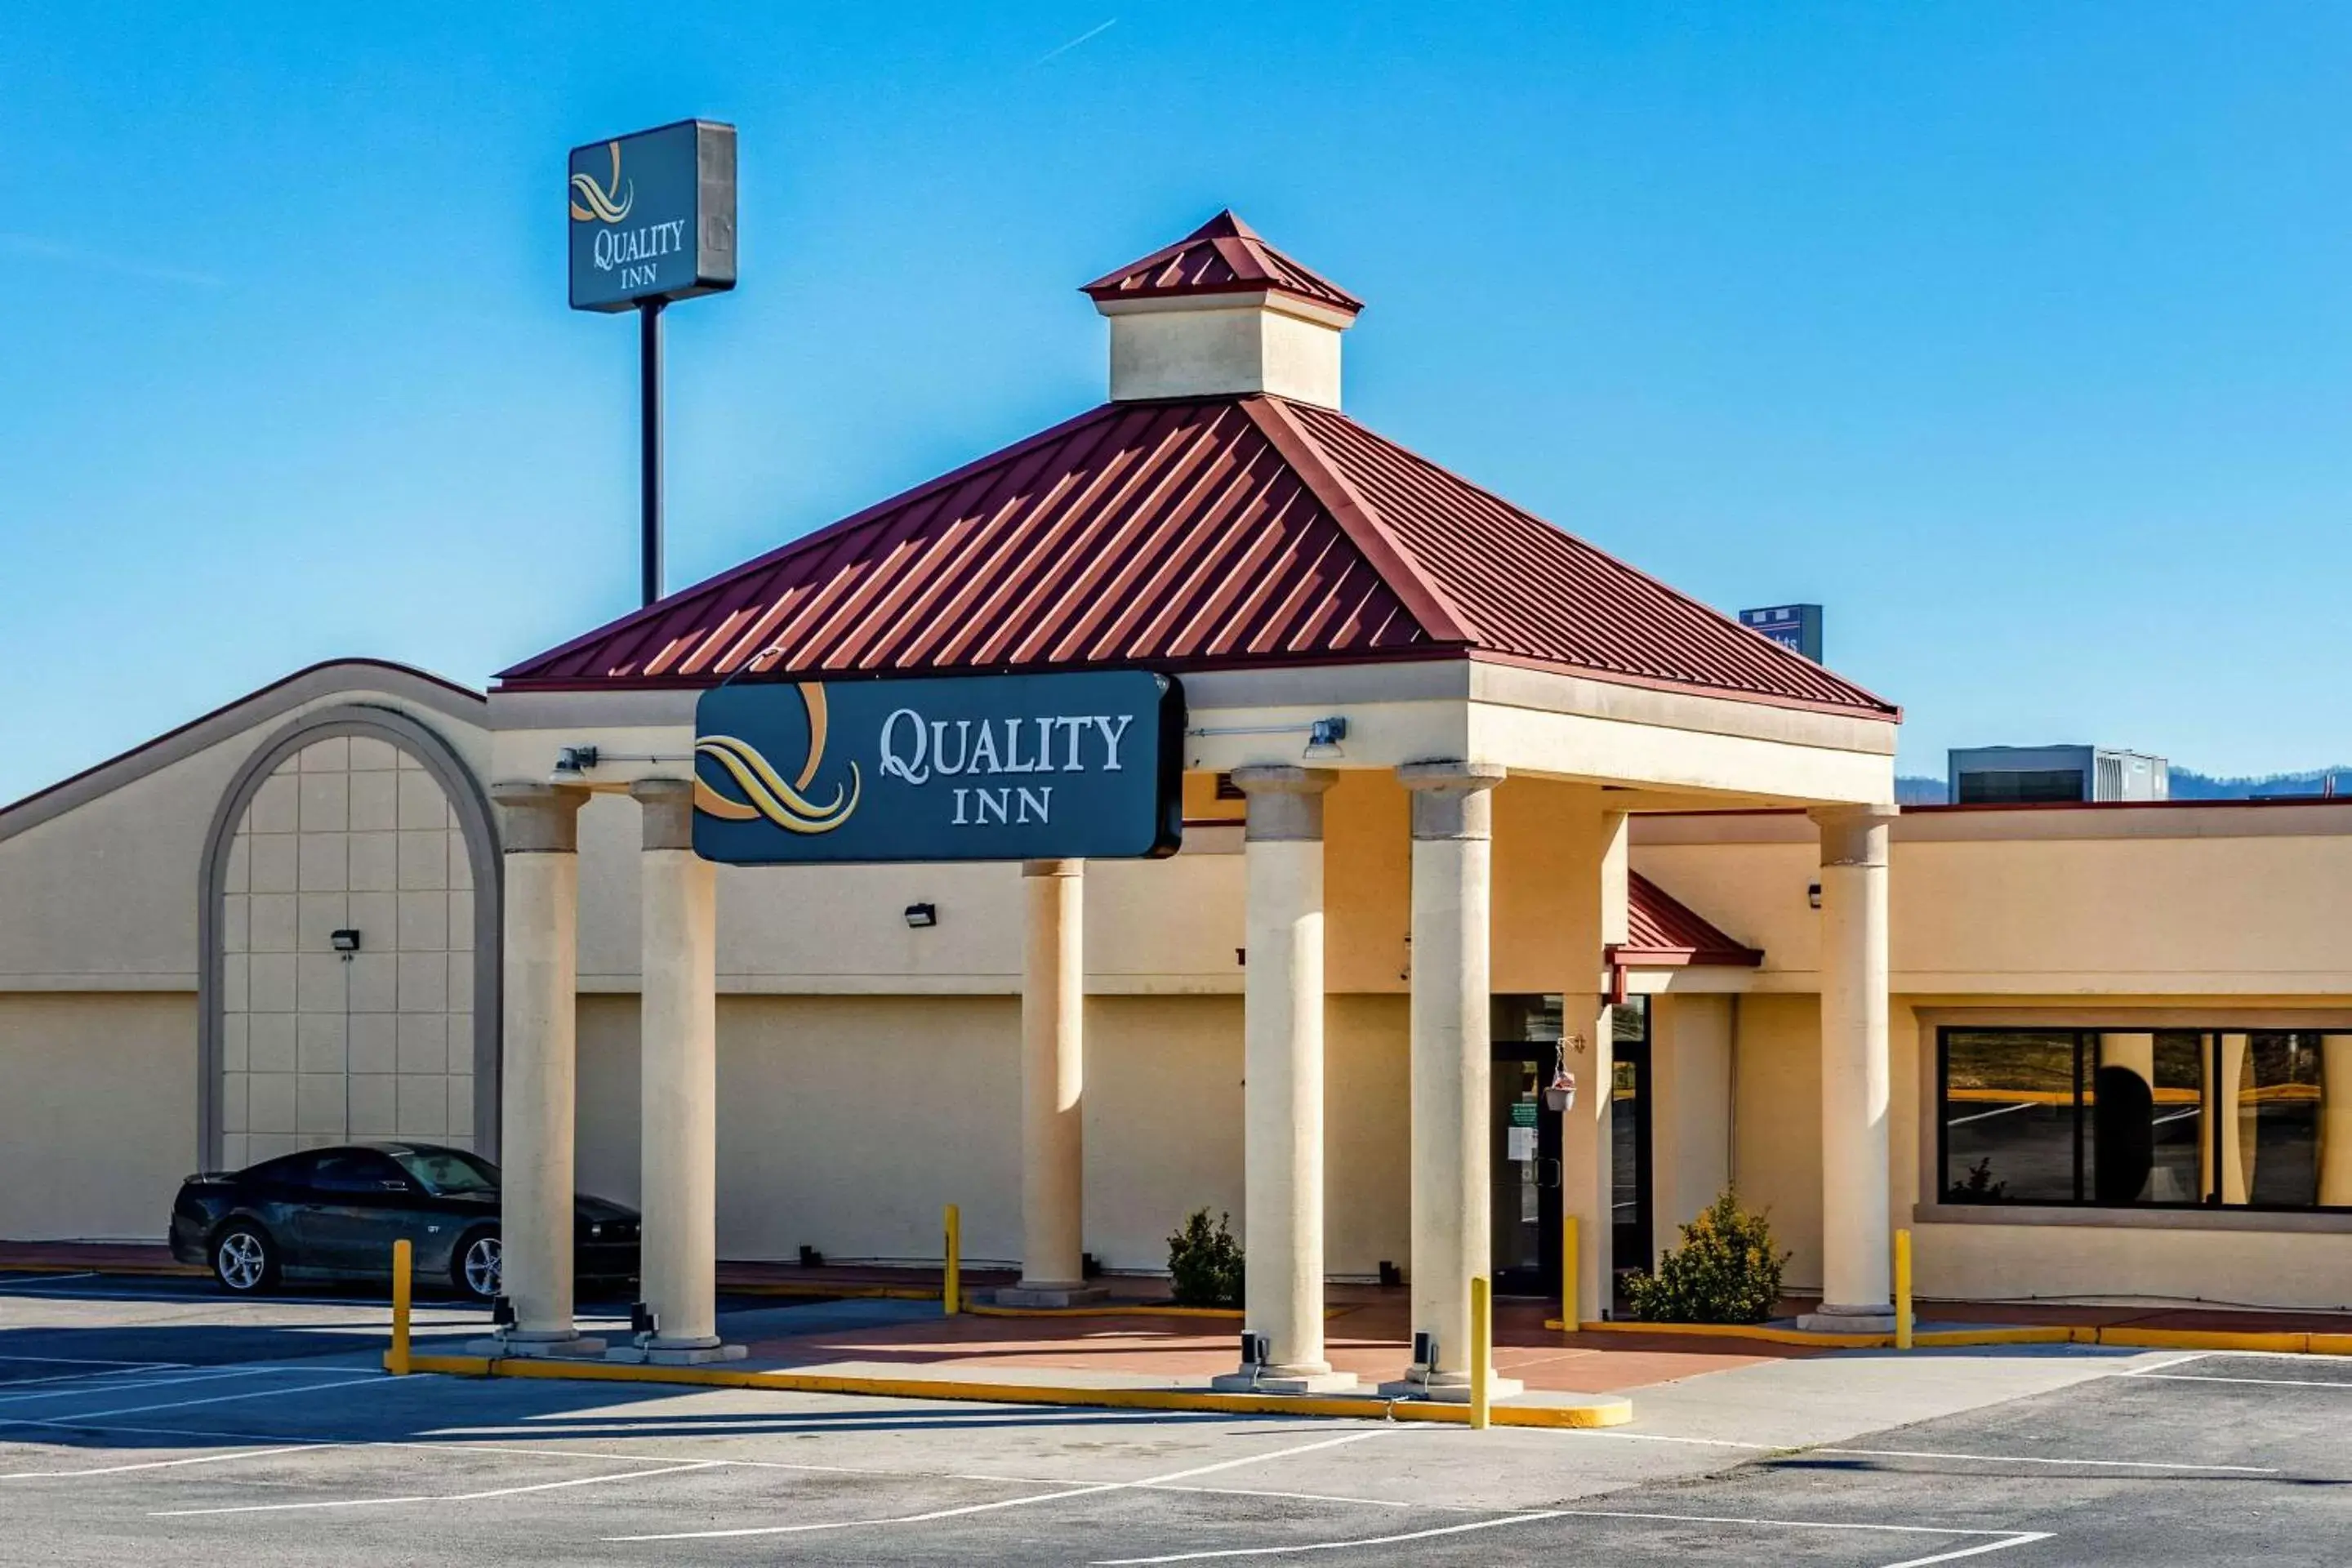 Property building in Quality Inn Newport